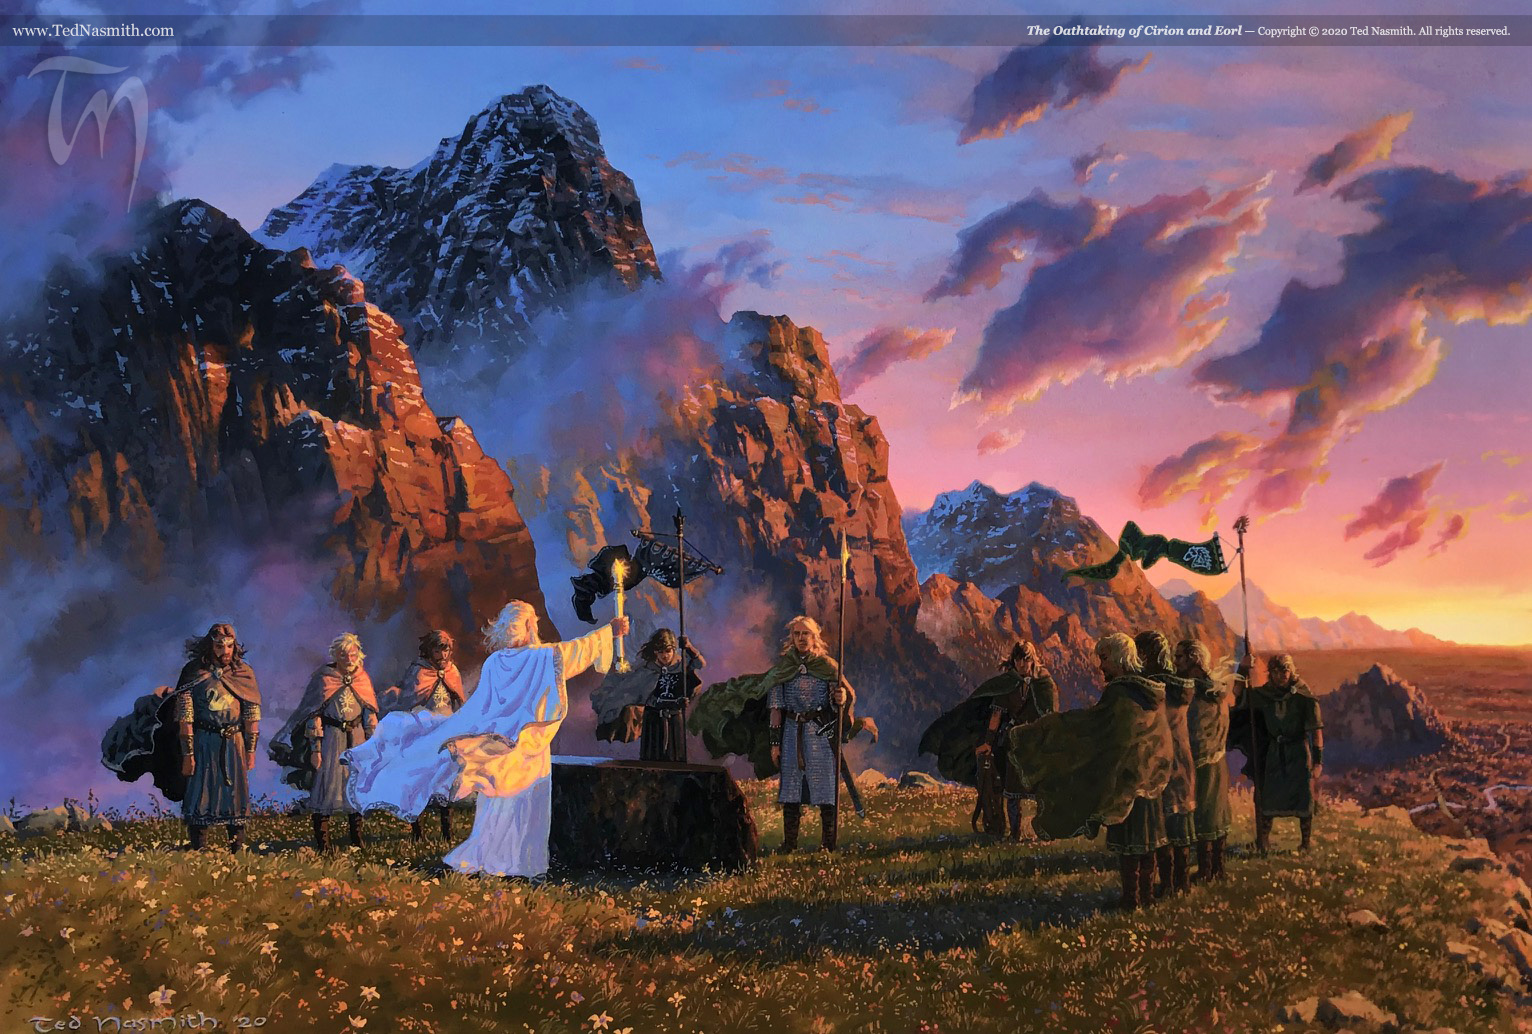 The Oathtaking of Cirion and Eorl – Ted Nasmith